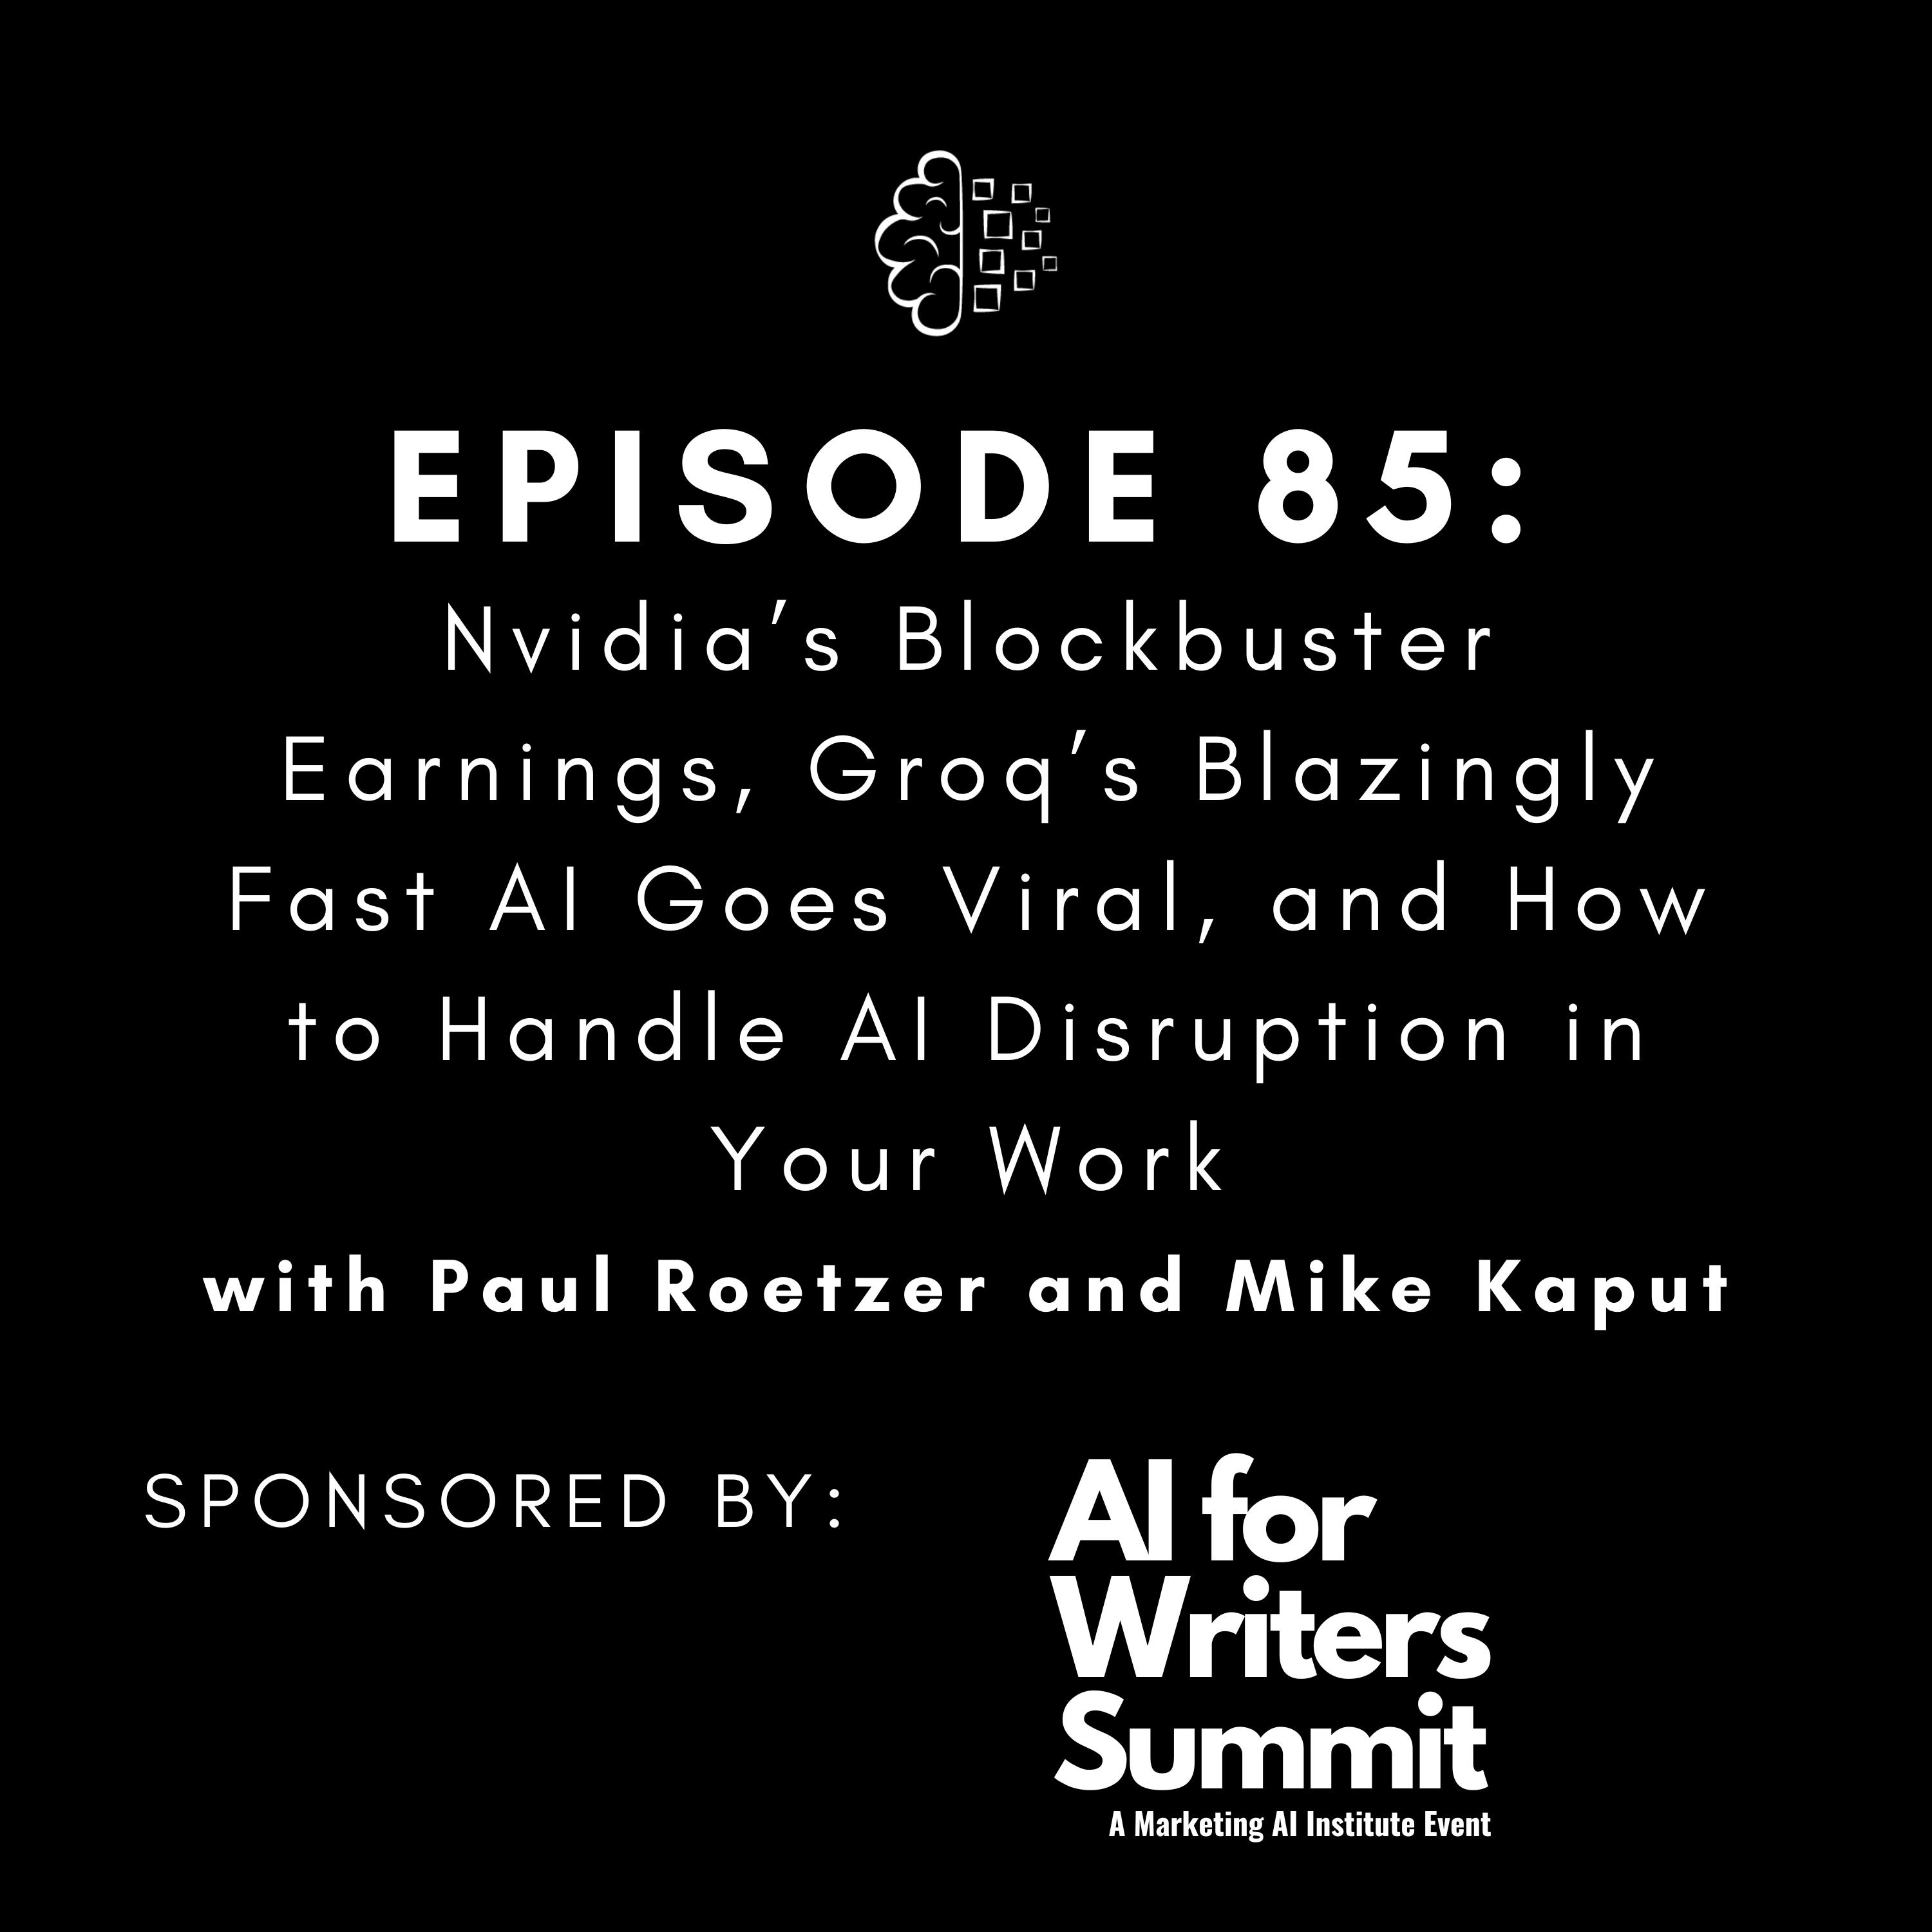 #85: Nvidia’s Blockbuster Earnings, Groq’s Blazingly Fast AI Goes Viral, and How to Handle AI Disruption in Your Work